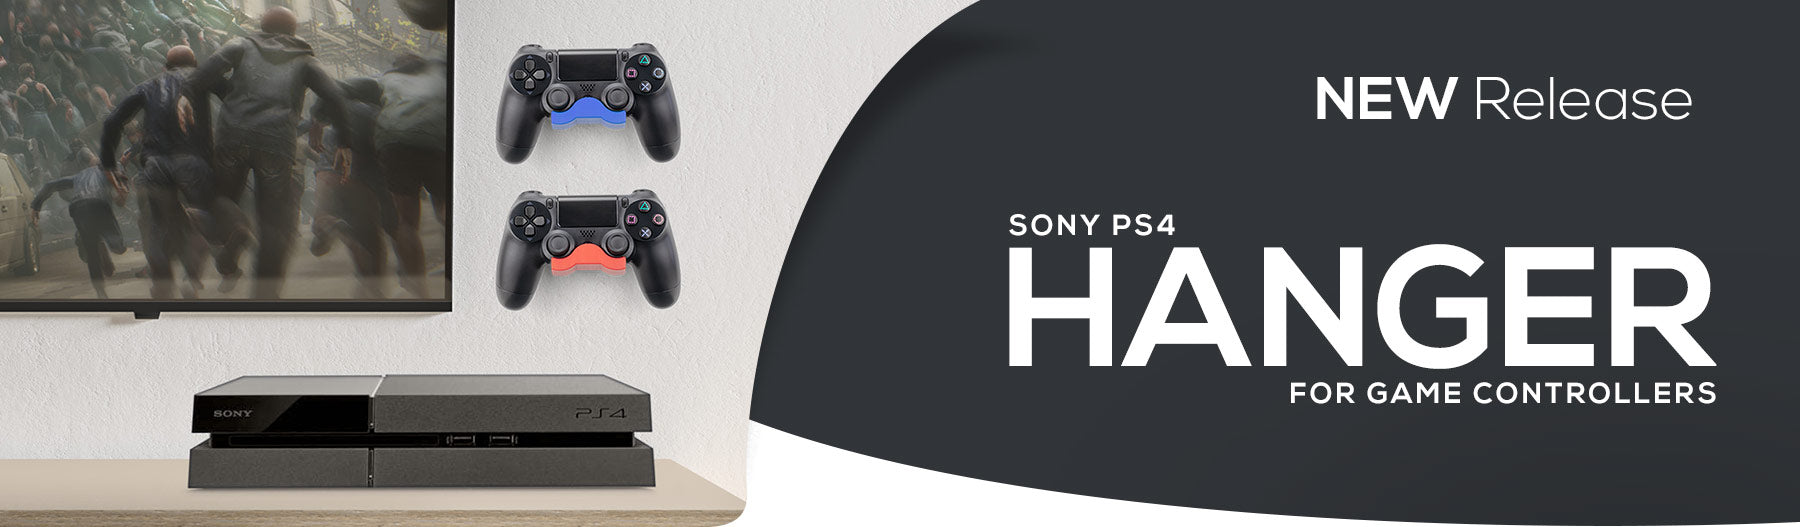 NEW - PS4 Game Controller Hanger